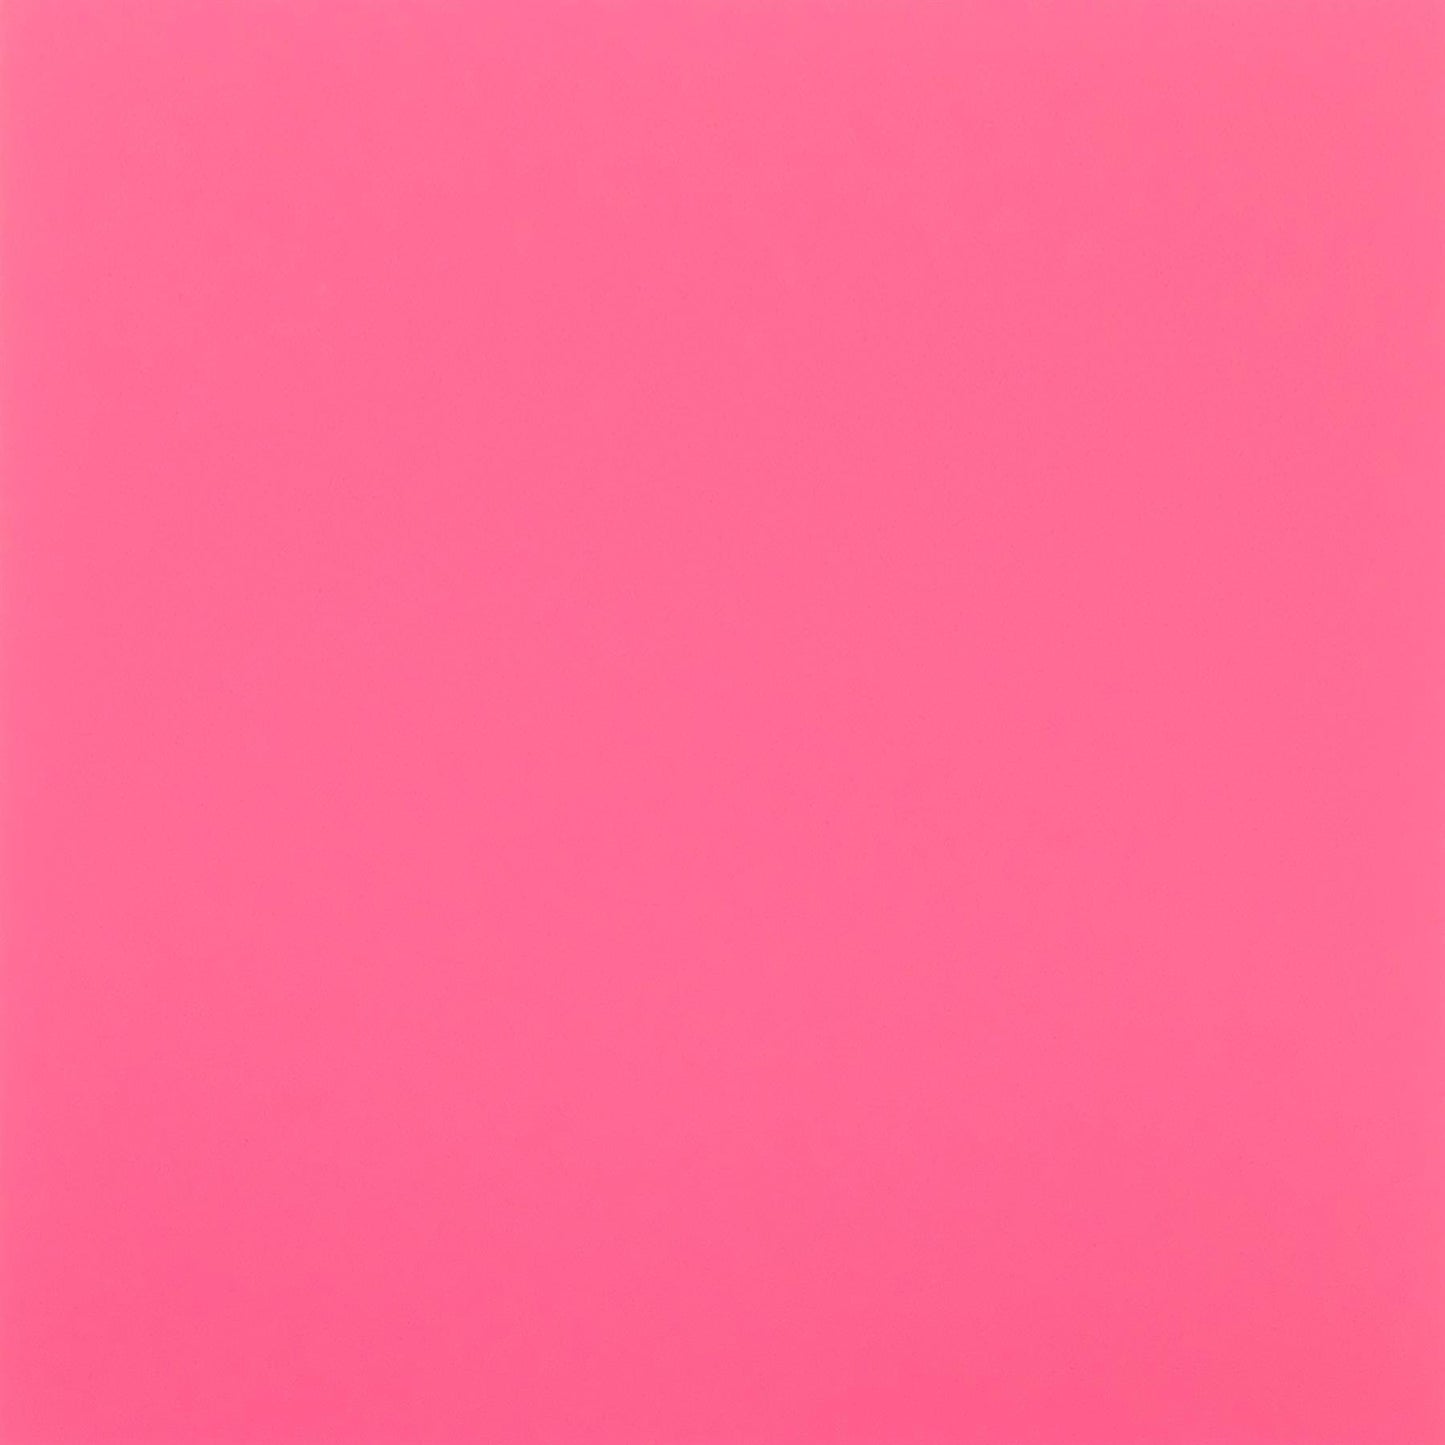 [Incudo] Pink Fluorescent Acrylic Sheet - 1000x600x3mm